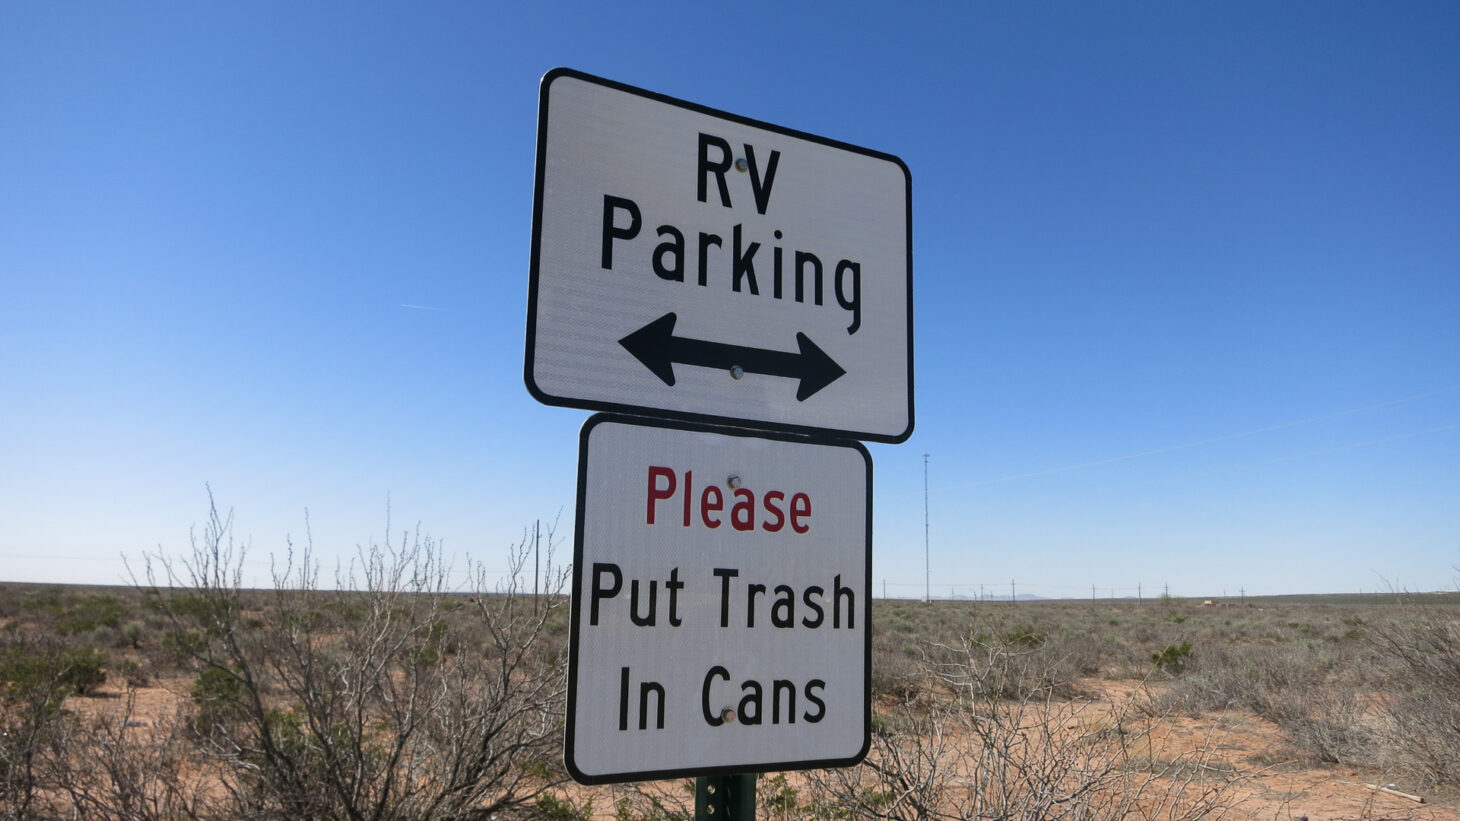 Sign at rest area reading "RV Parking" with two arrows and "Please Put Trash in Cans"